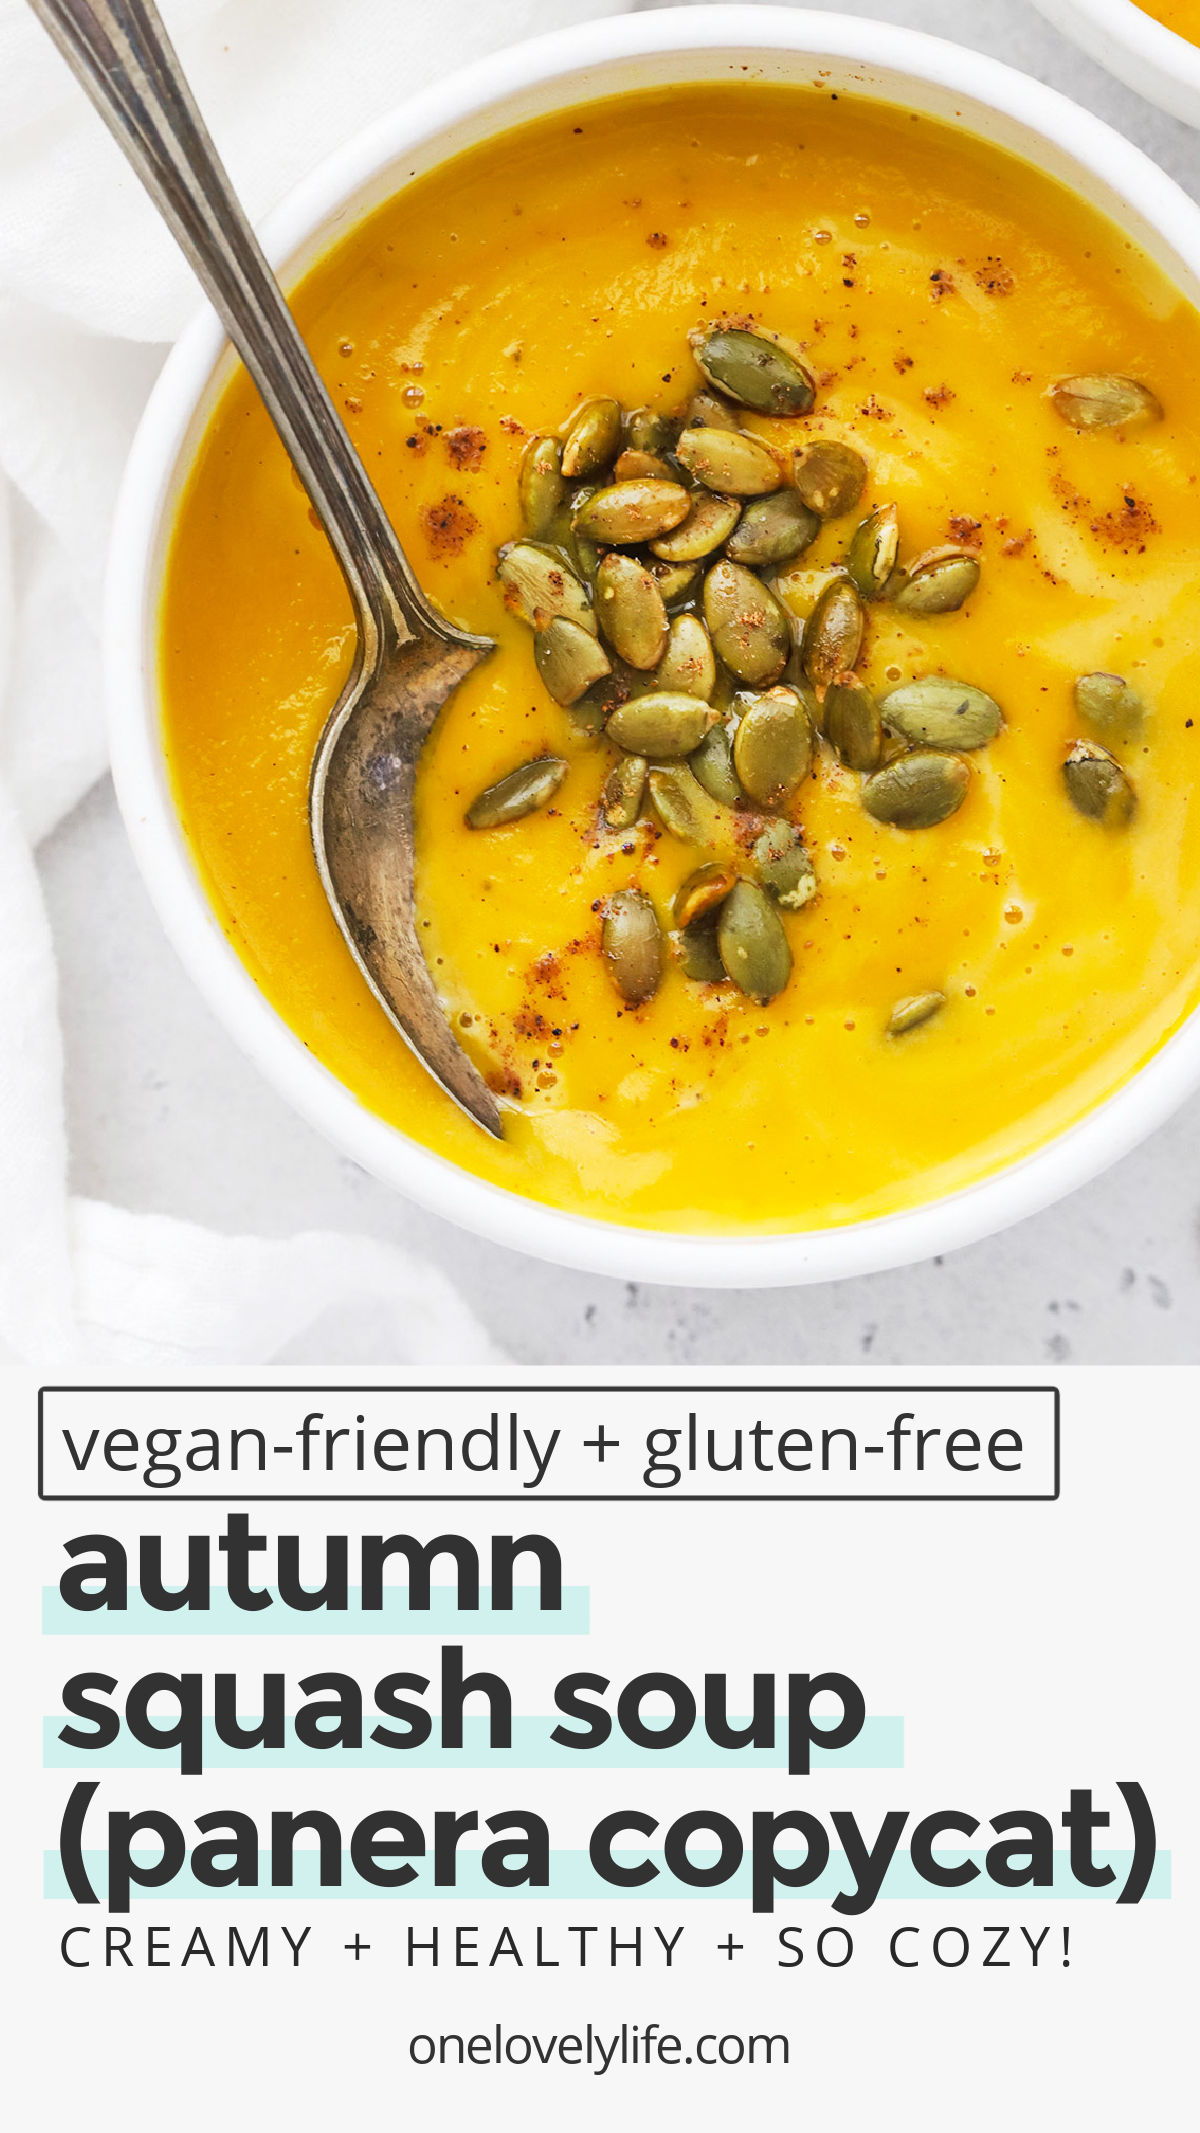 Autumn Squash Soup - We recreated the Panera squash soup recipe so you can make it at home! This creamy squash soup has the perfect blend of spices and is sure to warm you up on a chilly day. (Paleo, Vegan-Friendly) // Panera Autumn Squash Soup recipe // fall squash soup recipe // vegetarian squash soup // #squashsoup #squash #glutenfree #paleo #dairyfree #vegetarian